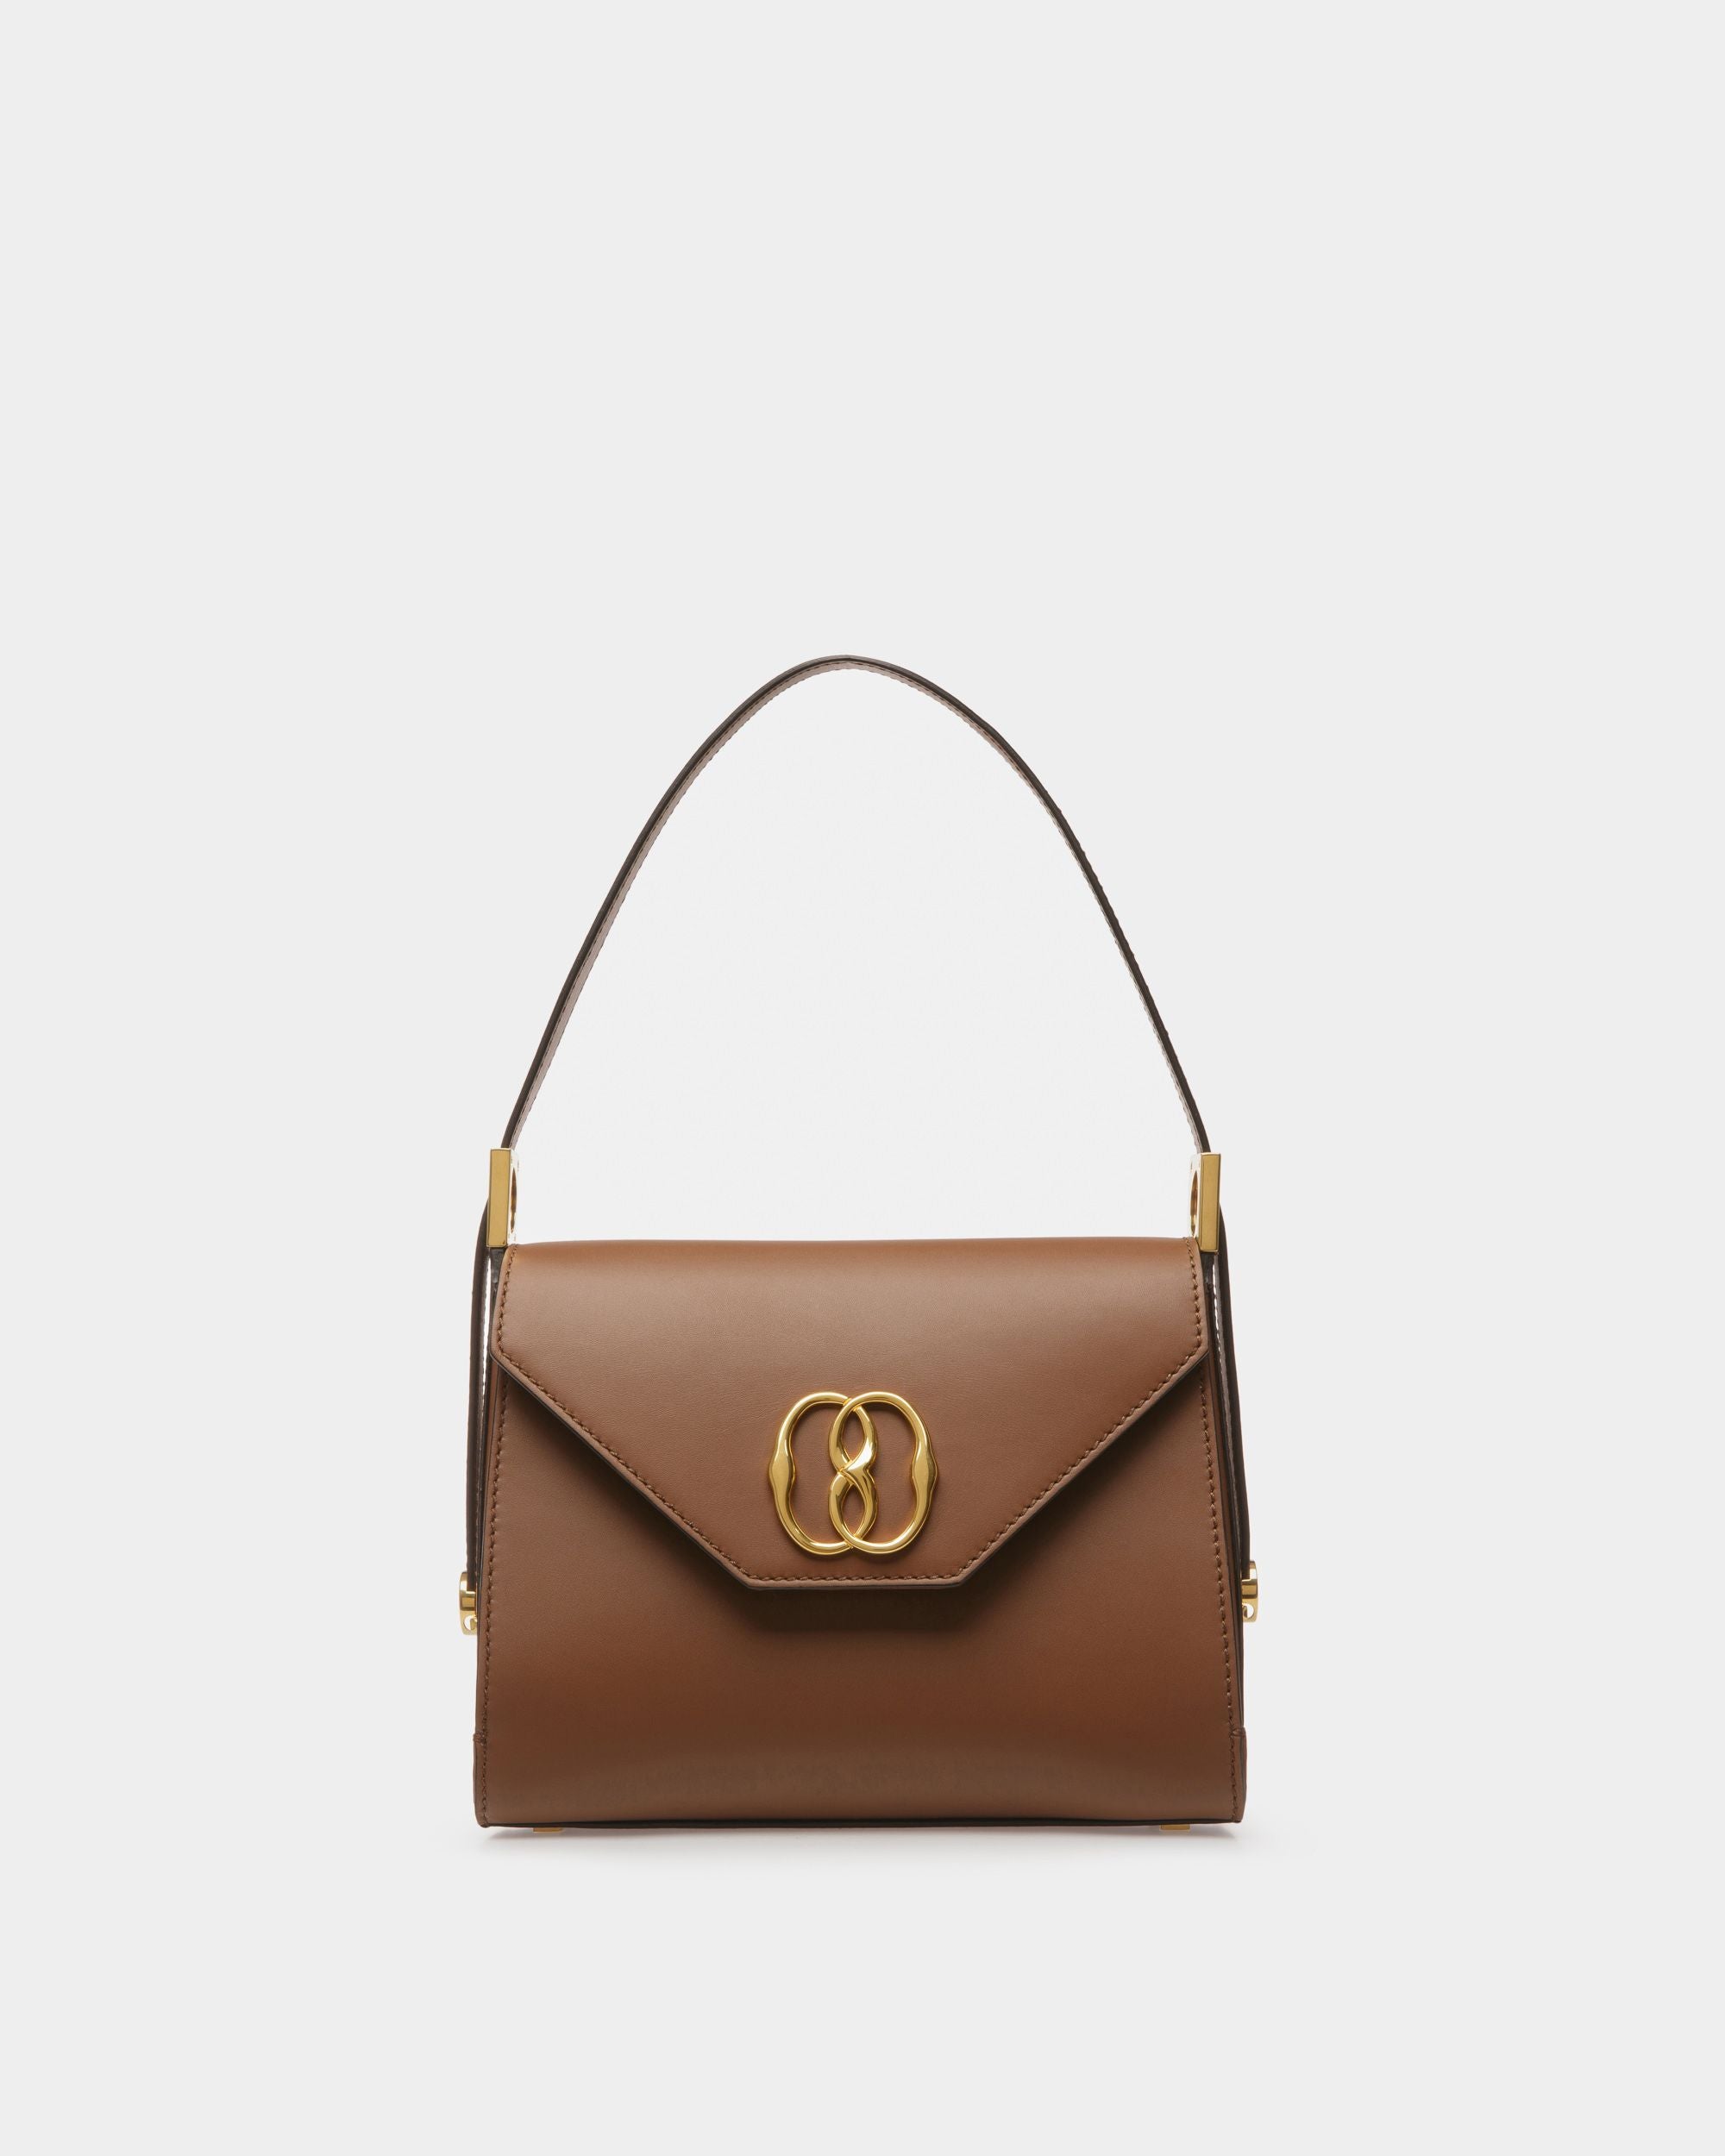 Emblem Trapeze | Women's Top Handle Purse | Brown Leather | Bally | Still Life Front